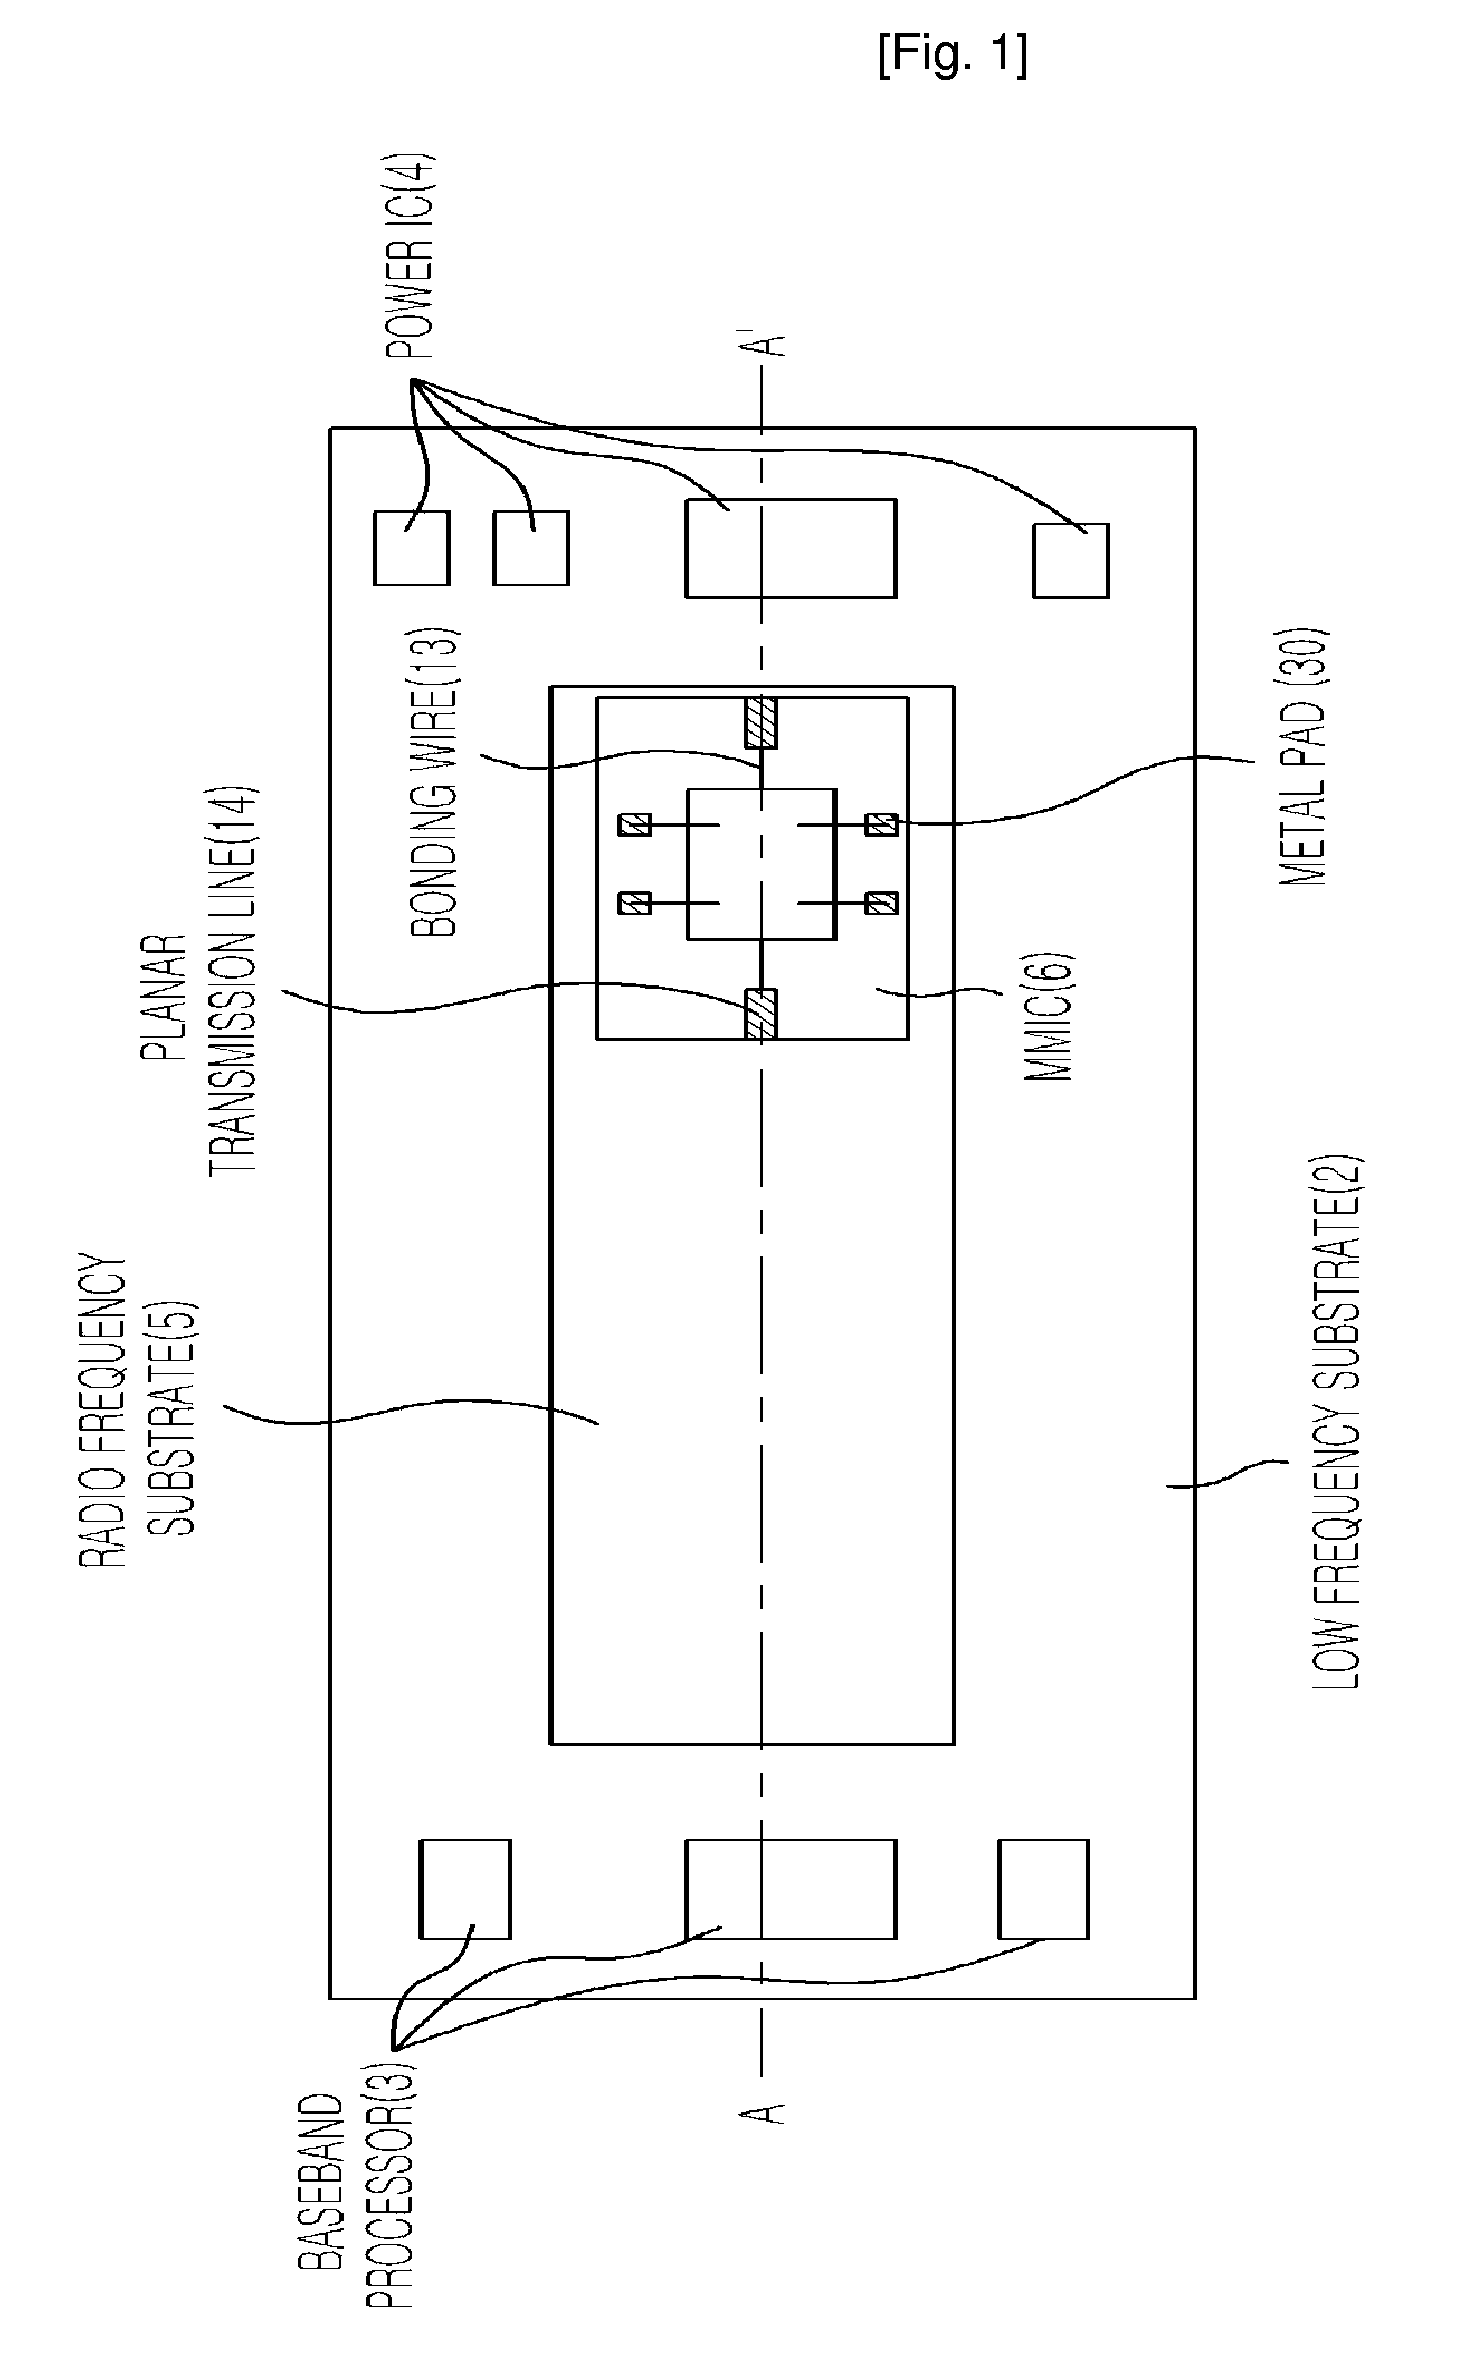 Mode Transition Circuit for Transferring Radio Frequency Signal and Transceiver Module Having the Same